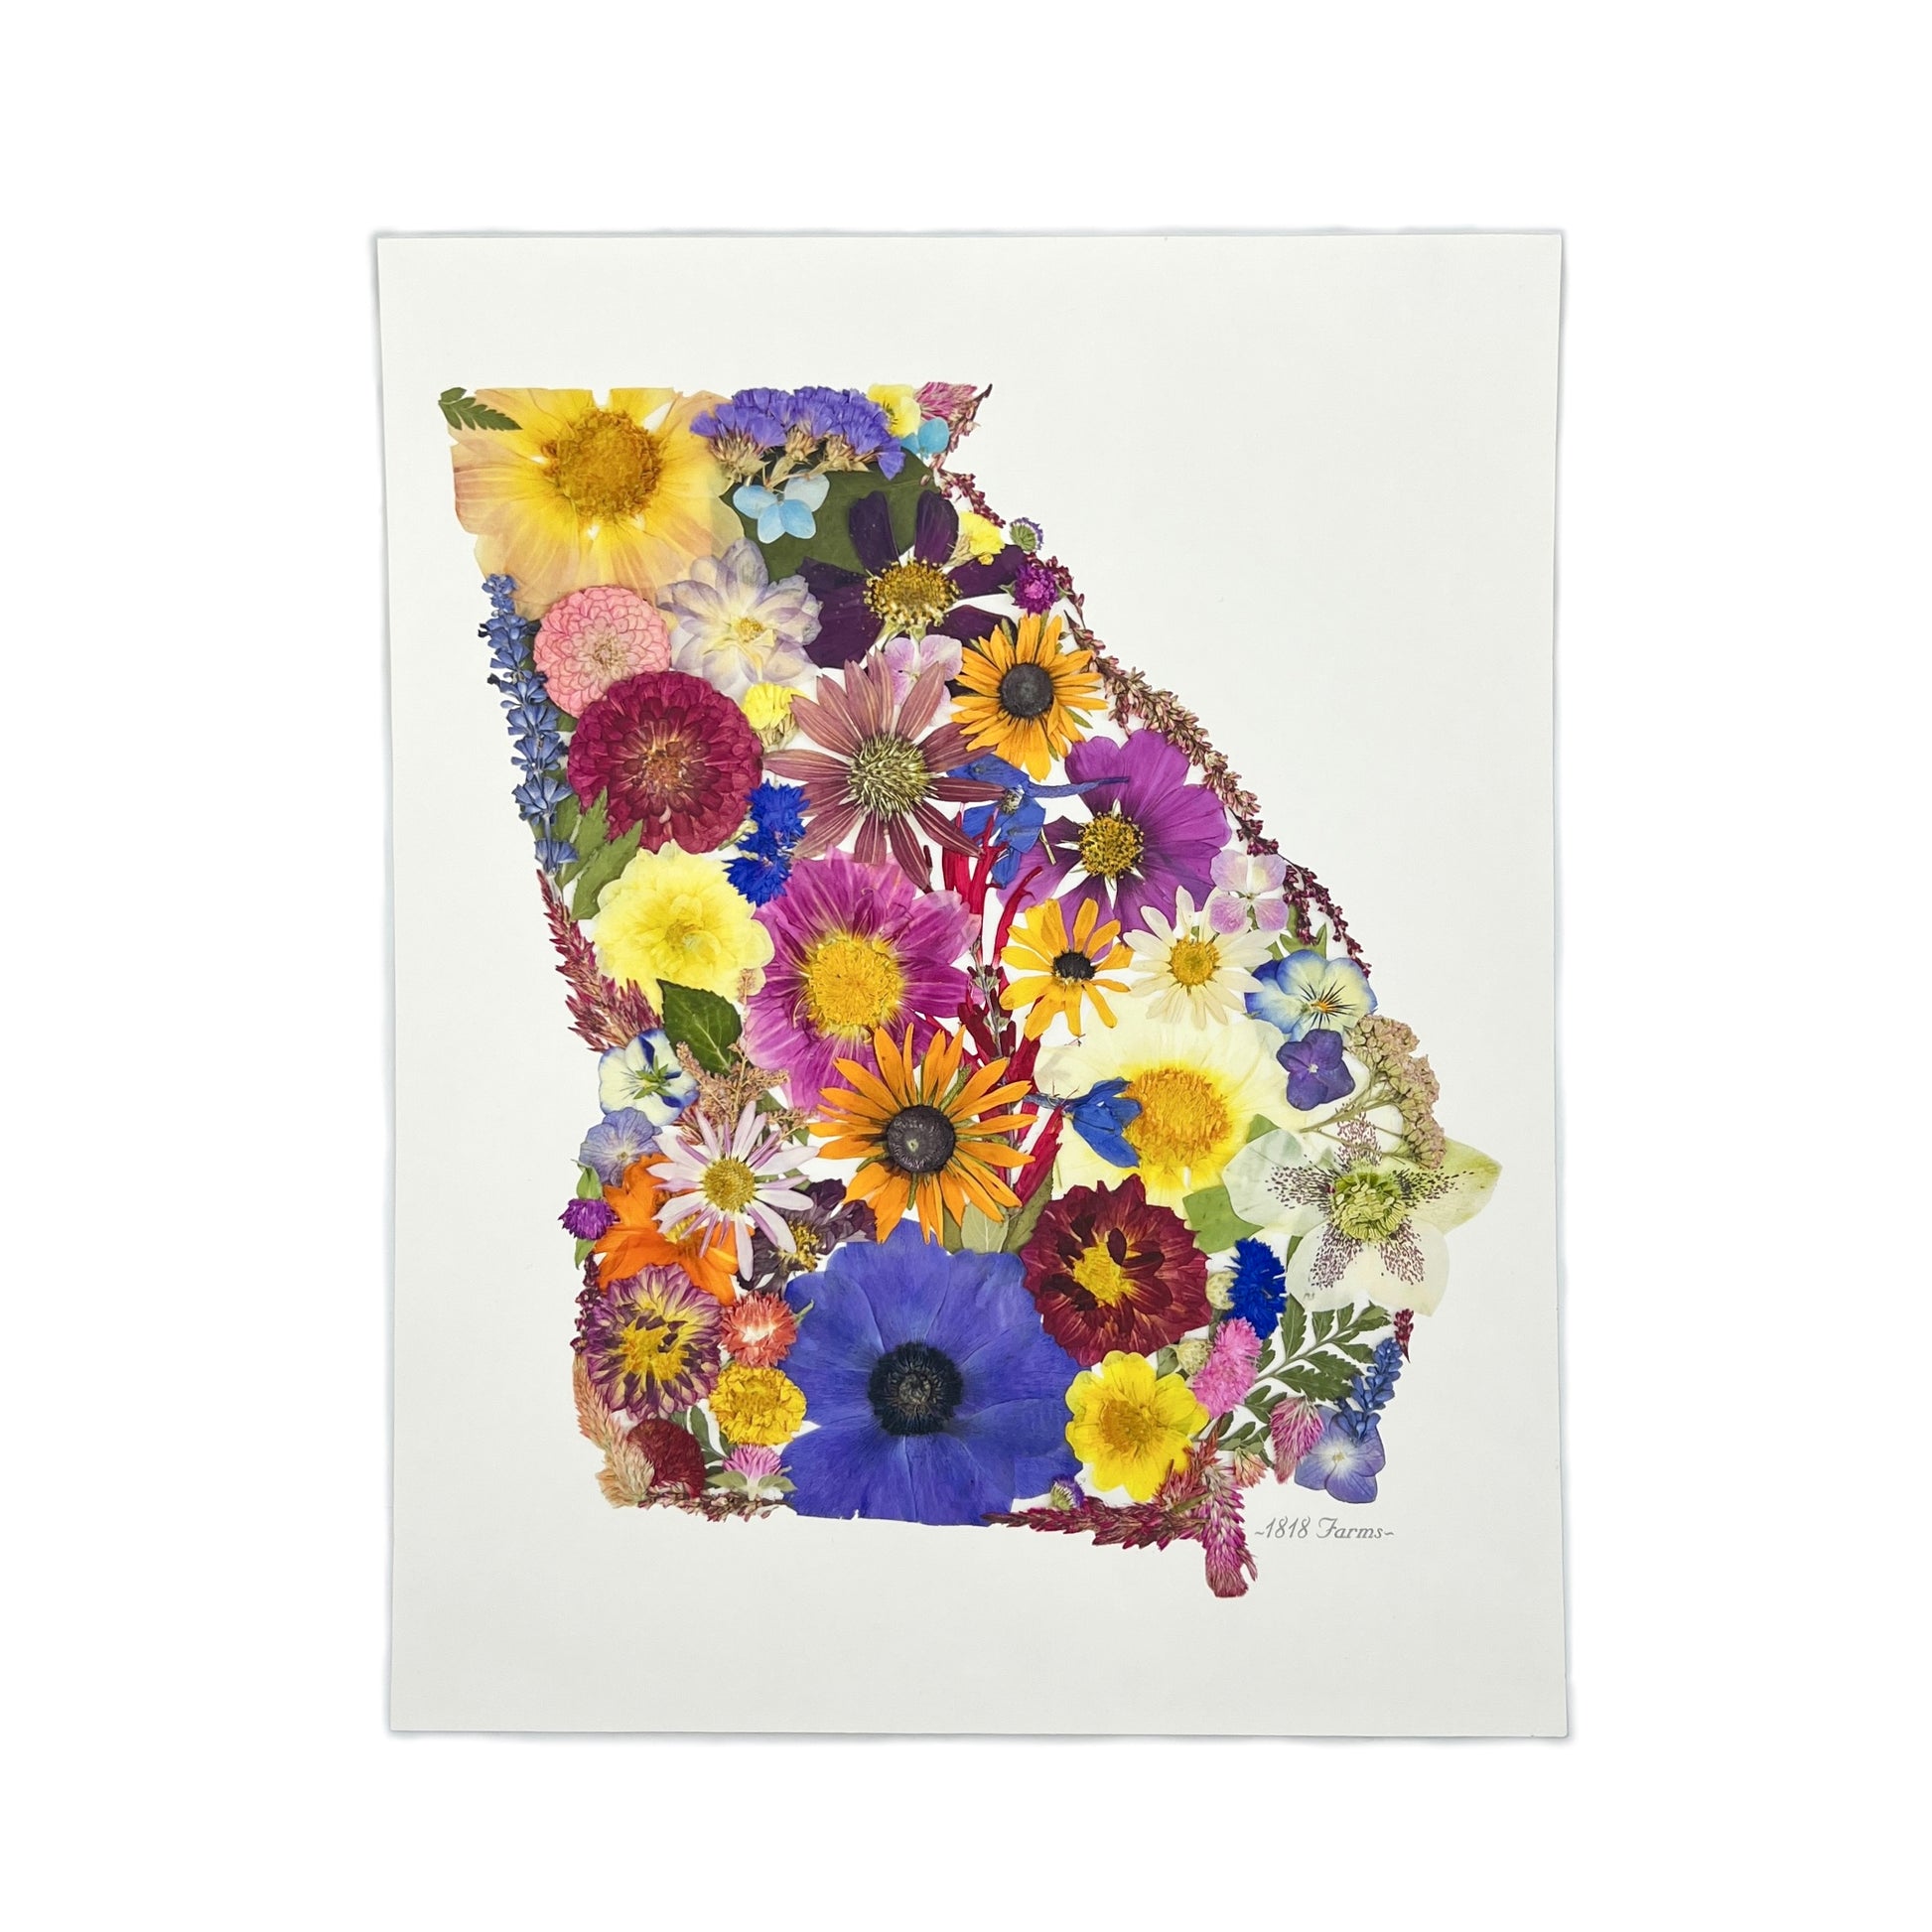 State Themed Giclée Print Featuring Dried, Pressed Flowers - "Where I Bloom" Collection Giclee Art Print 1818 Farms 11"x14" Georgia 